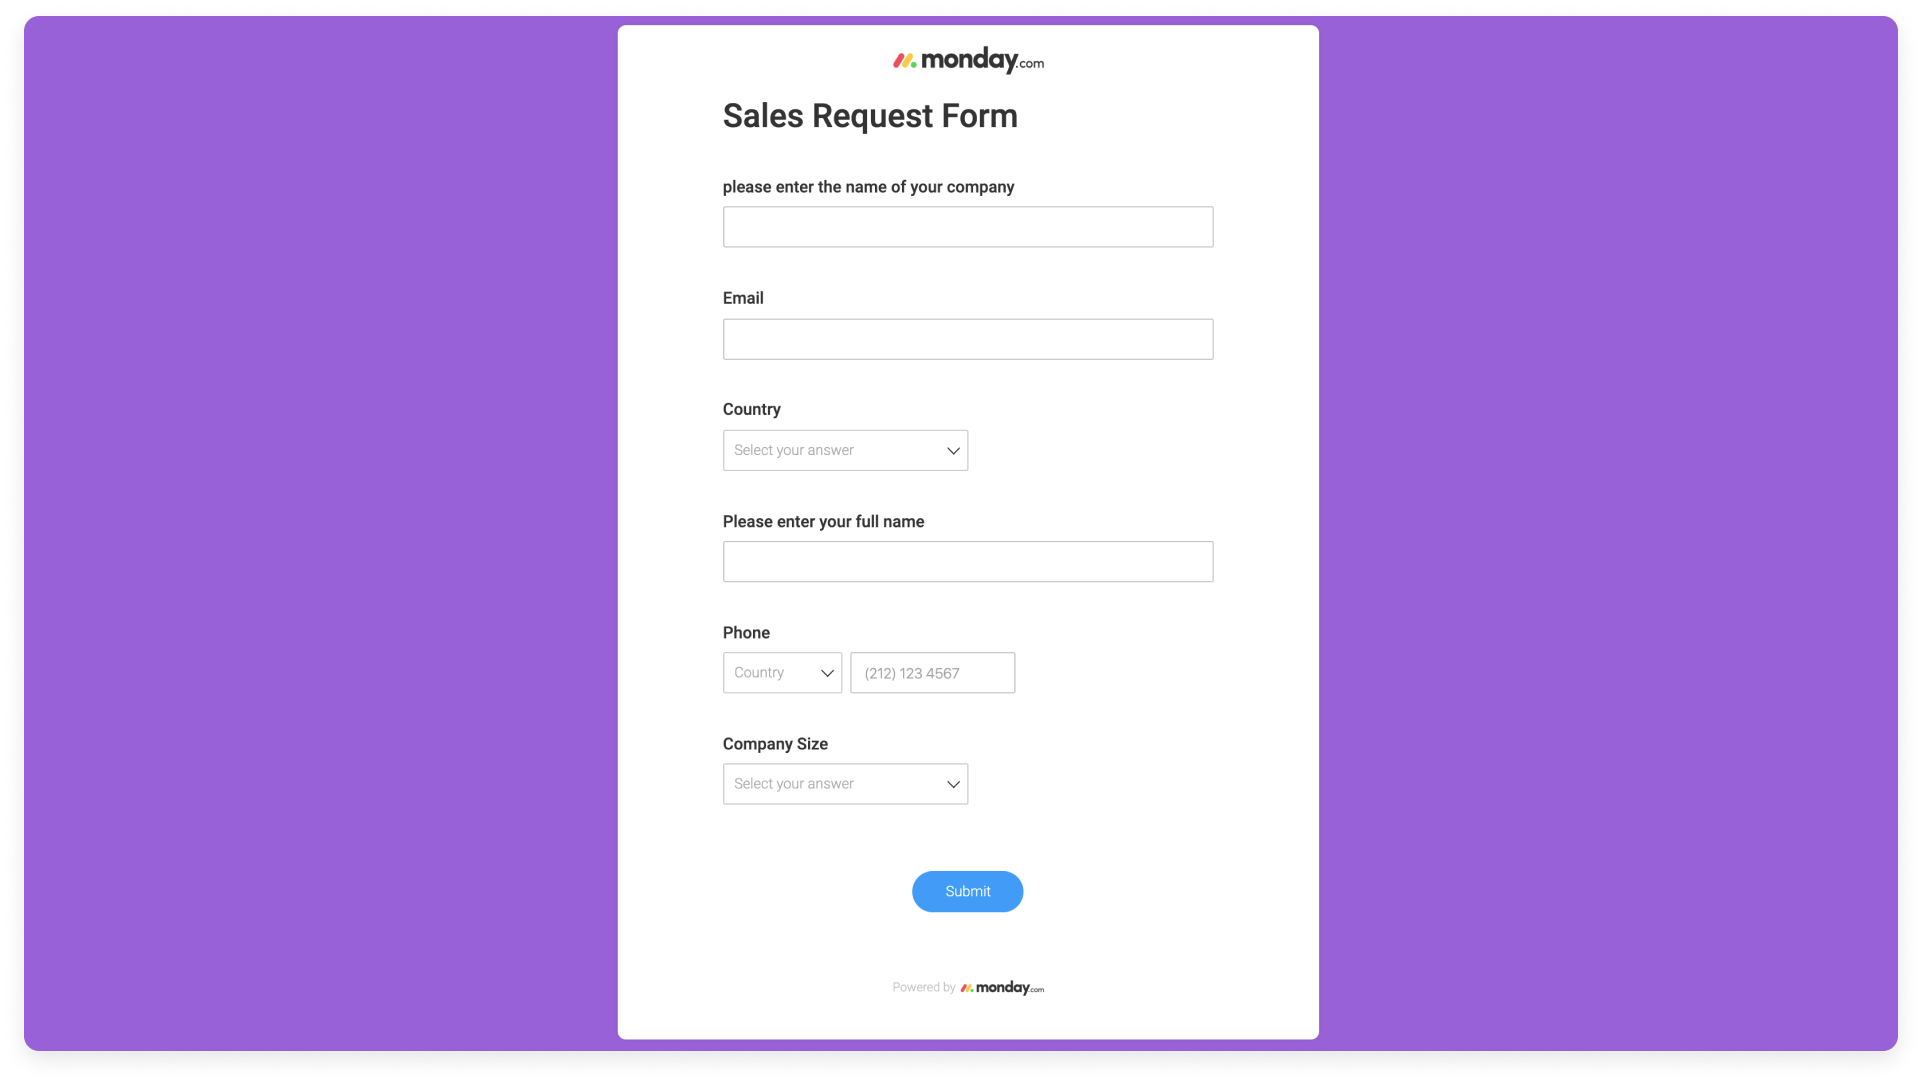 sales request form in monday.com